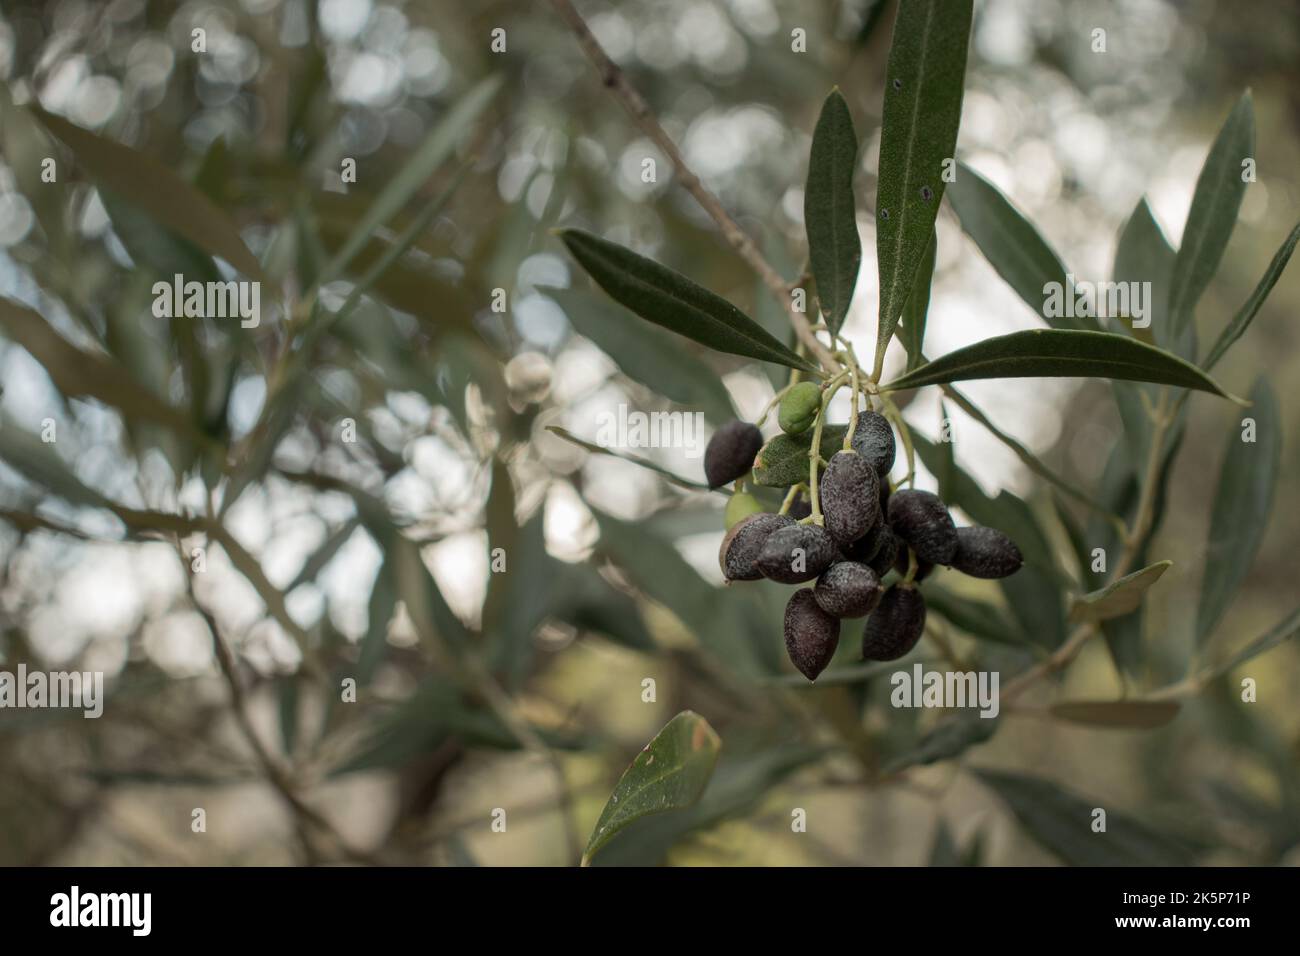 Branch of an olive tree. Black greek olives. Blurry olive leaves in the backround Stock Photo